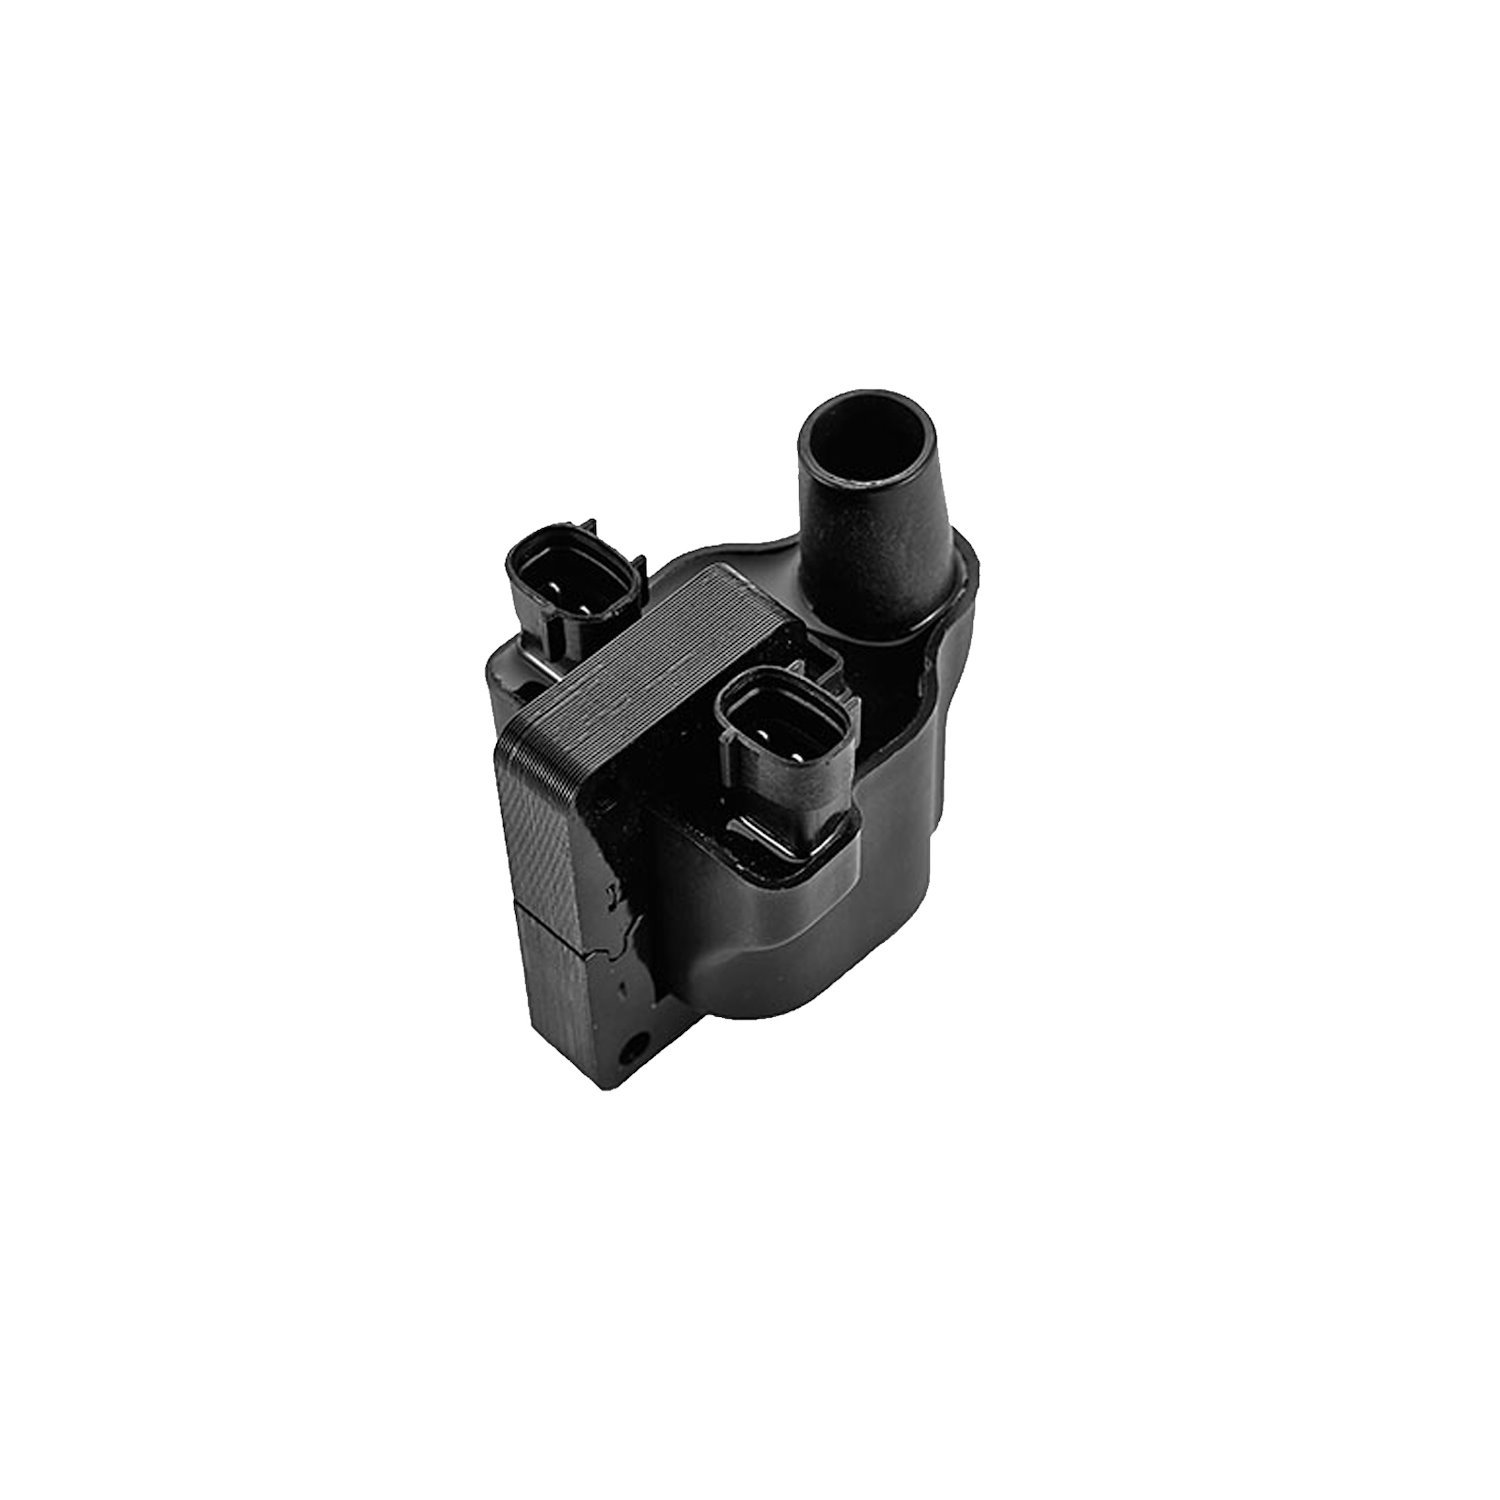 OE Replacement Ignition Coil for MAZDA 2.6L 4CYL & 3.0L V6